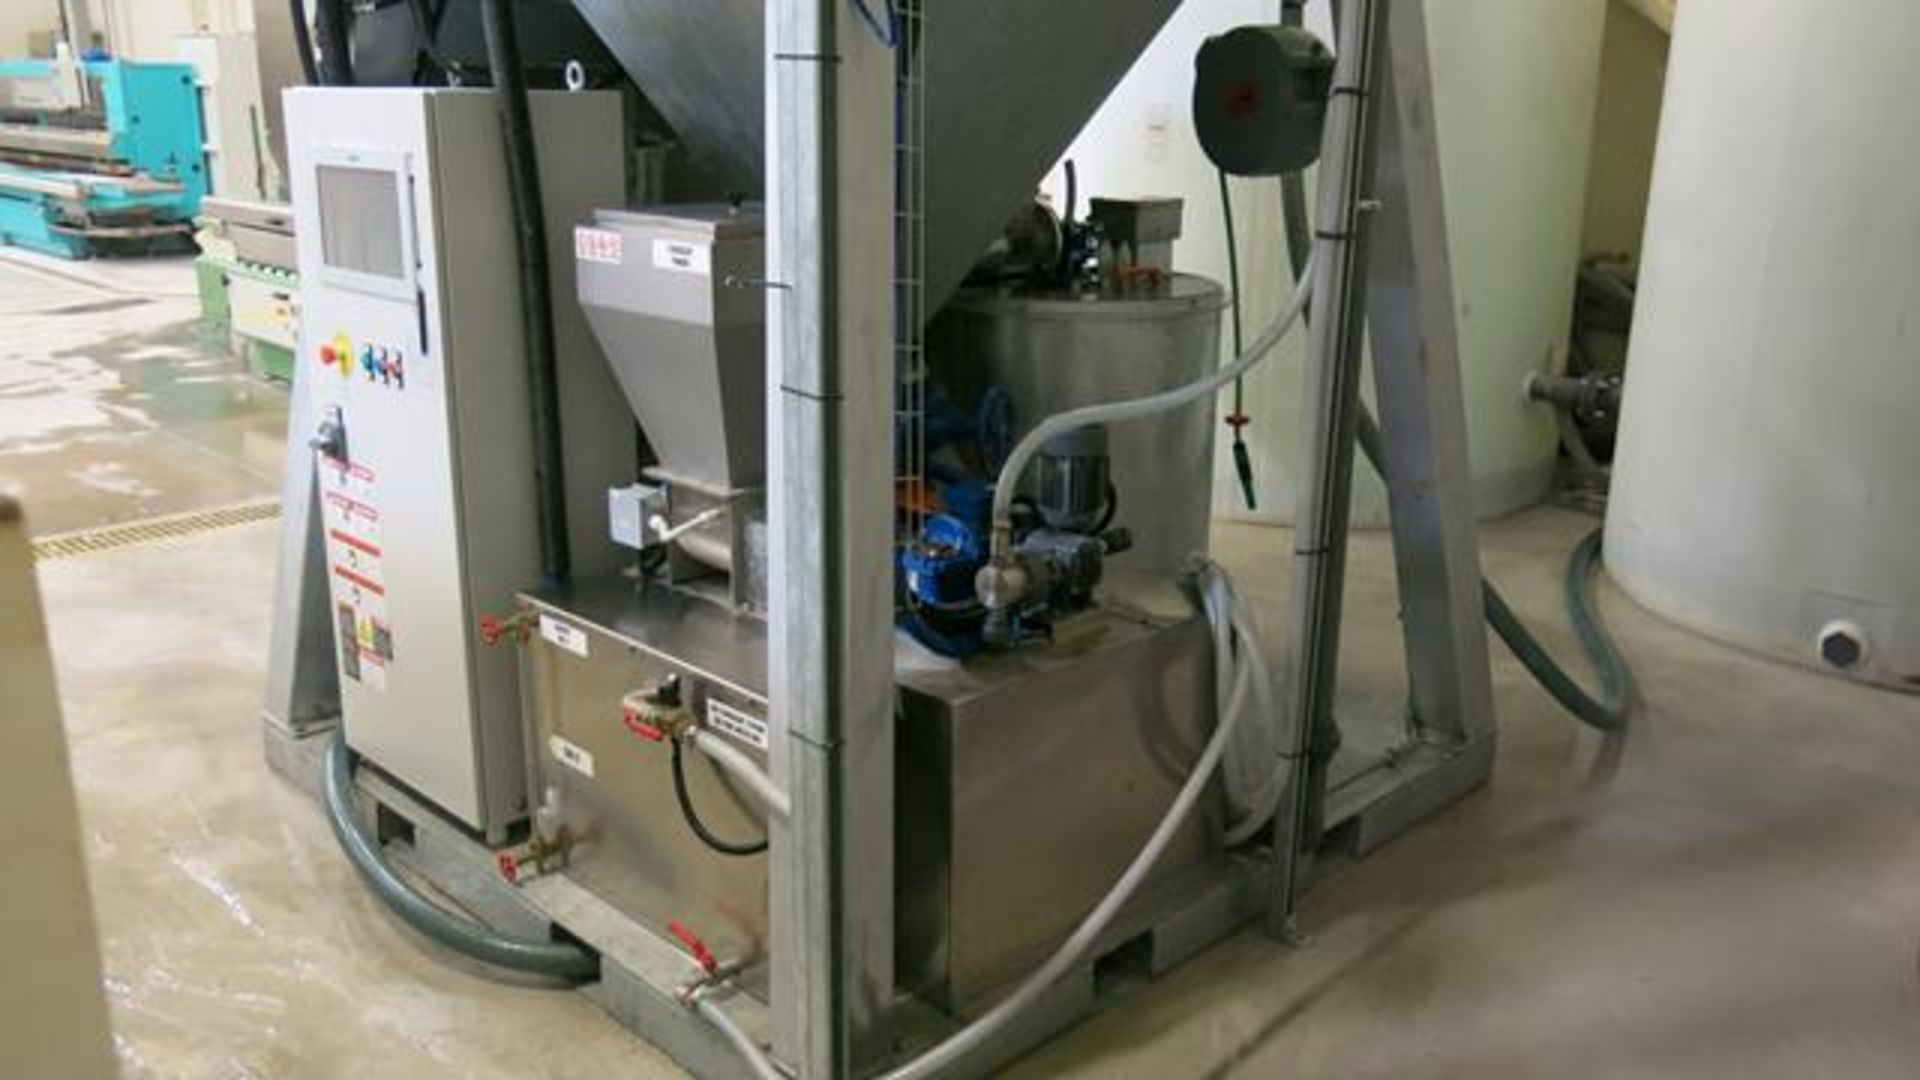 DAL PRETE, MINI COMPACT 3.0, WASTEWATER TREATMENT SYSTEM, S/N 121-19, 2019,(RIGGING $4650), $150,000 - Image 8 of 13